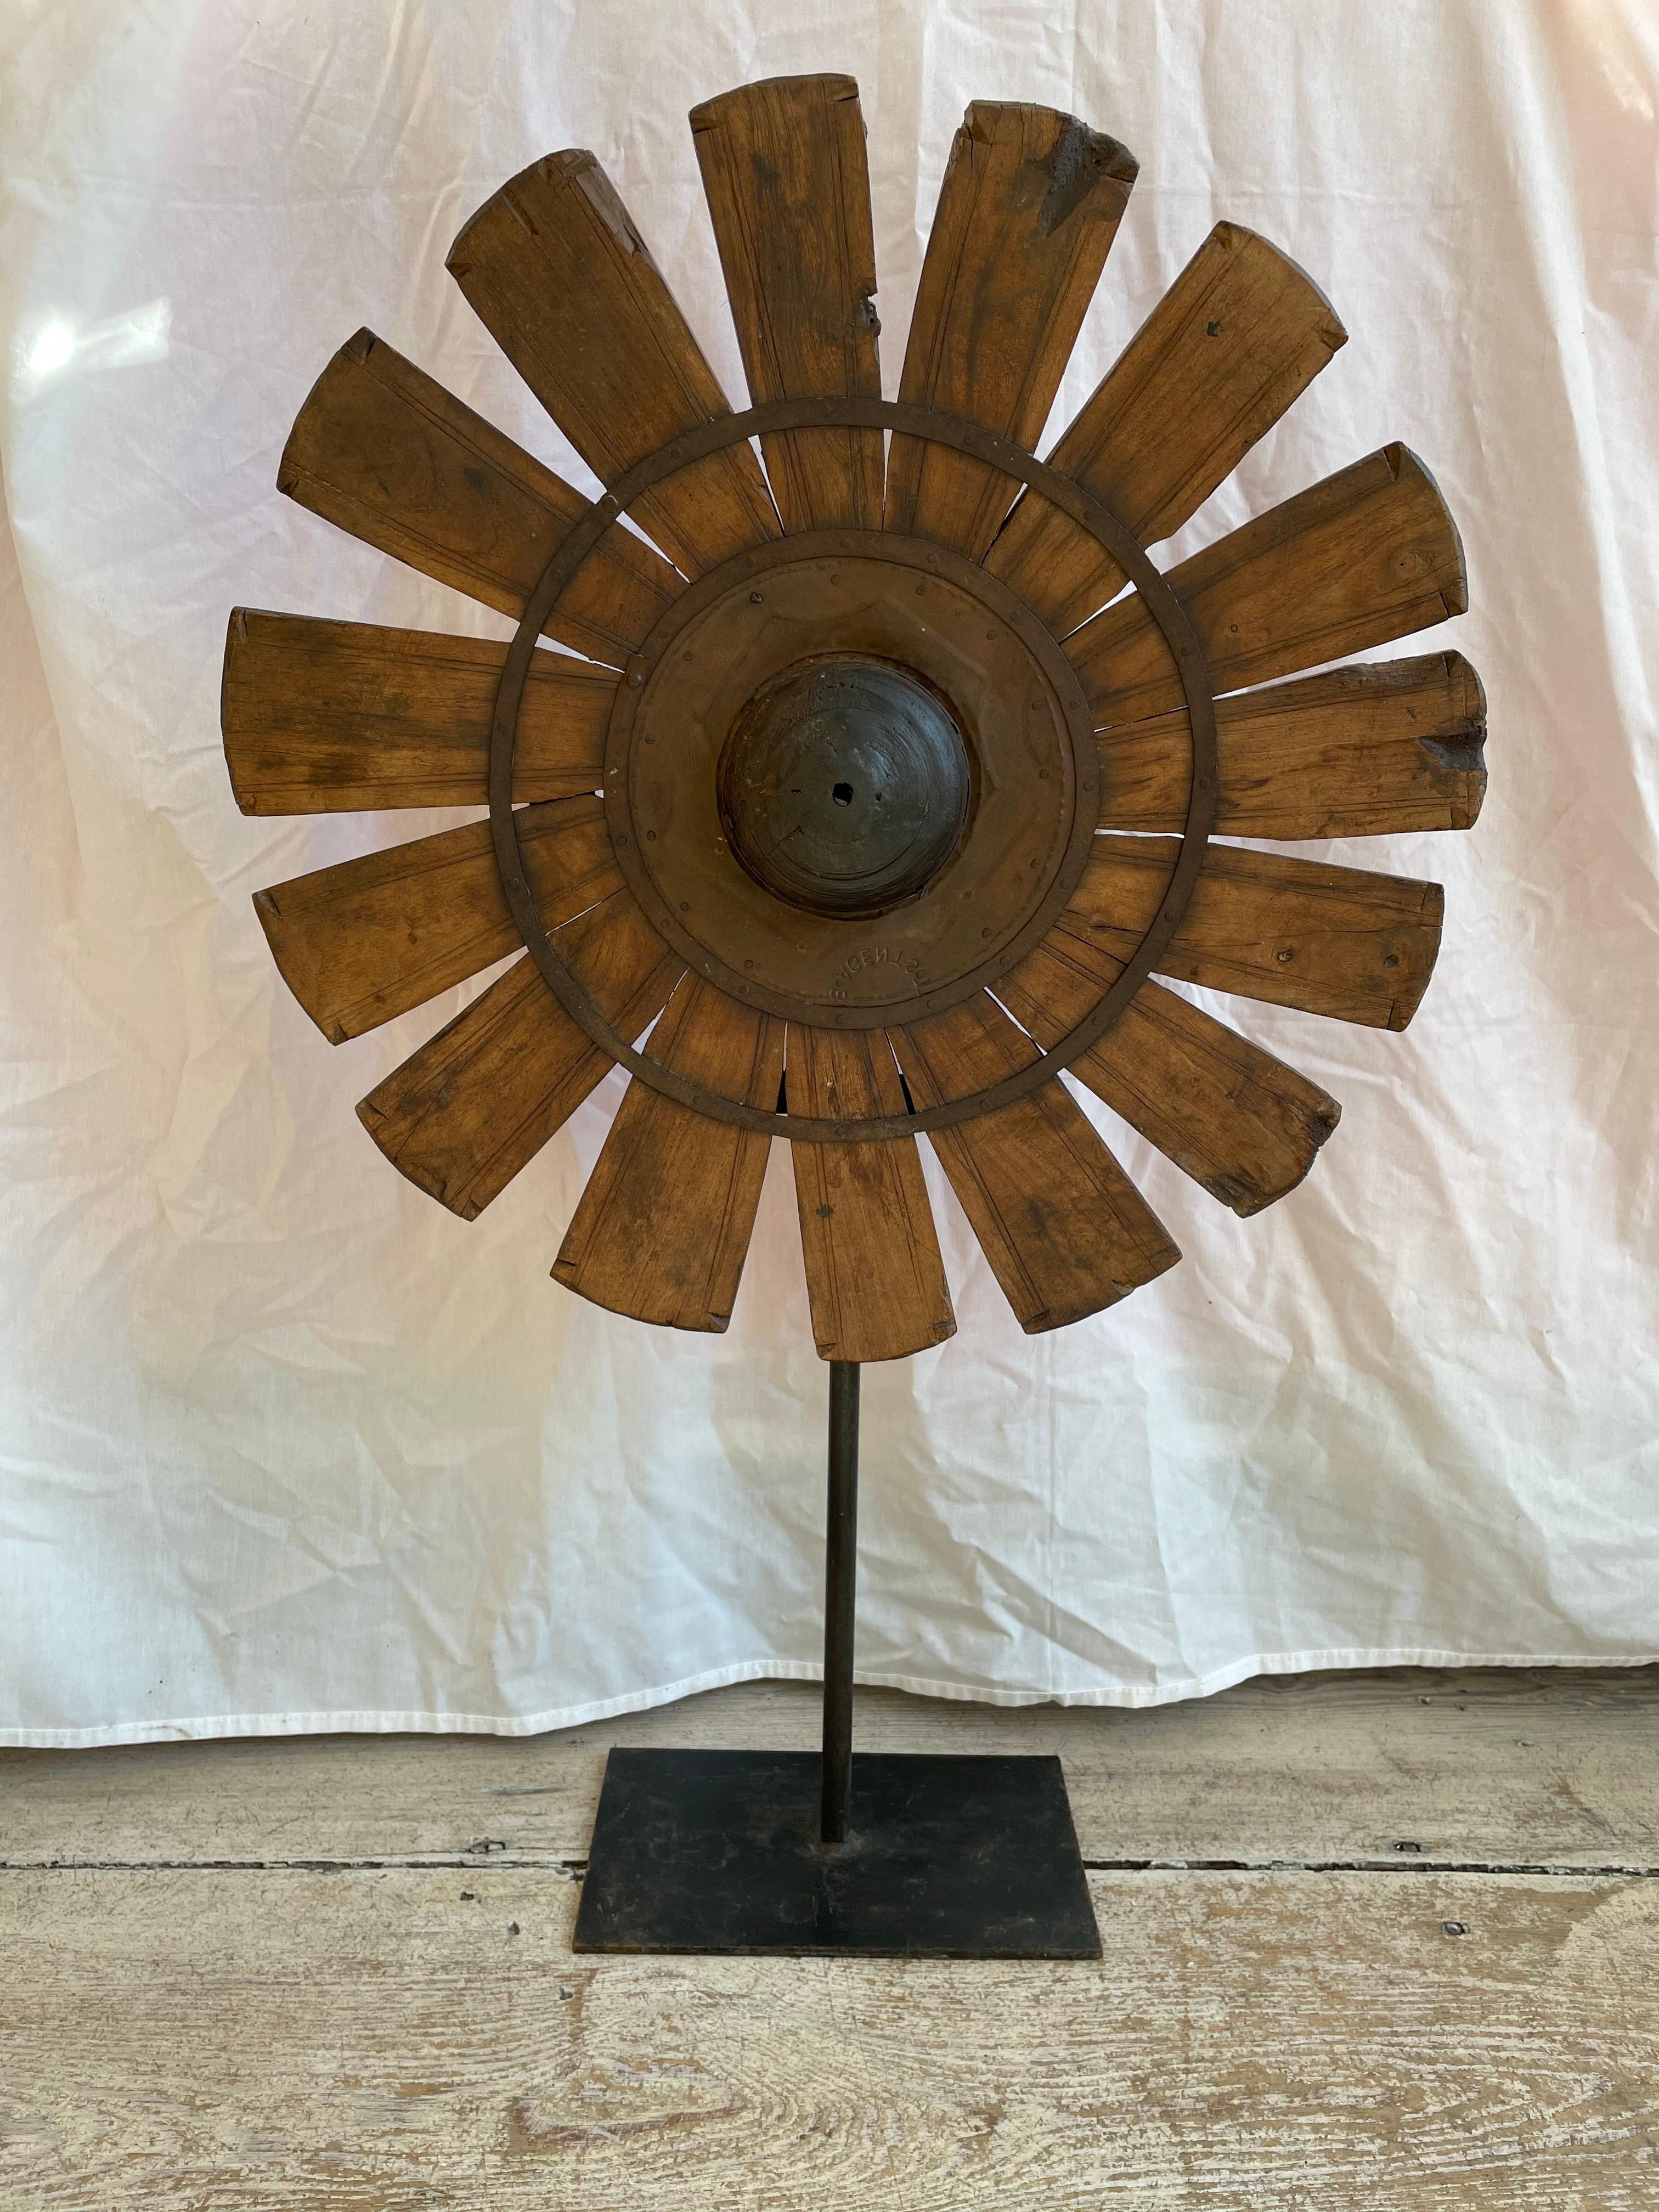 A fascinating vintage silk spinning wheel repurposed into a standing sculpture. It is teak and iron mounted on an iron rod and base. Has a wonderful textural and organic component, subtle floral imagery and history. The base is 10 inches x 6 inches.